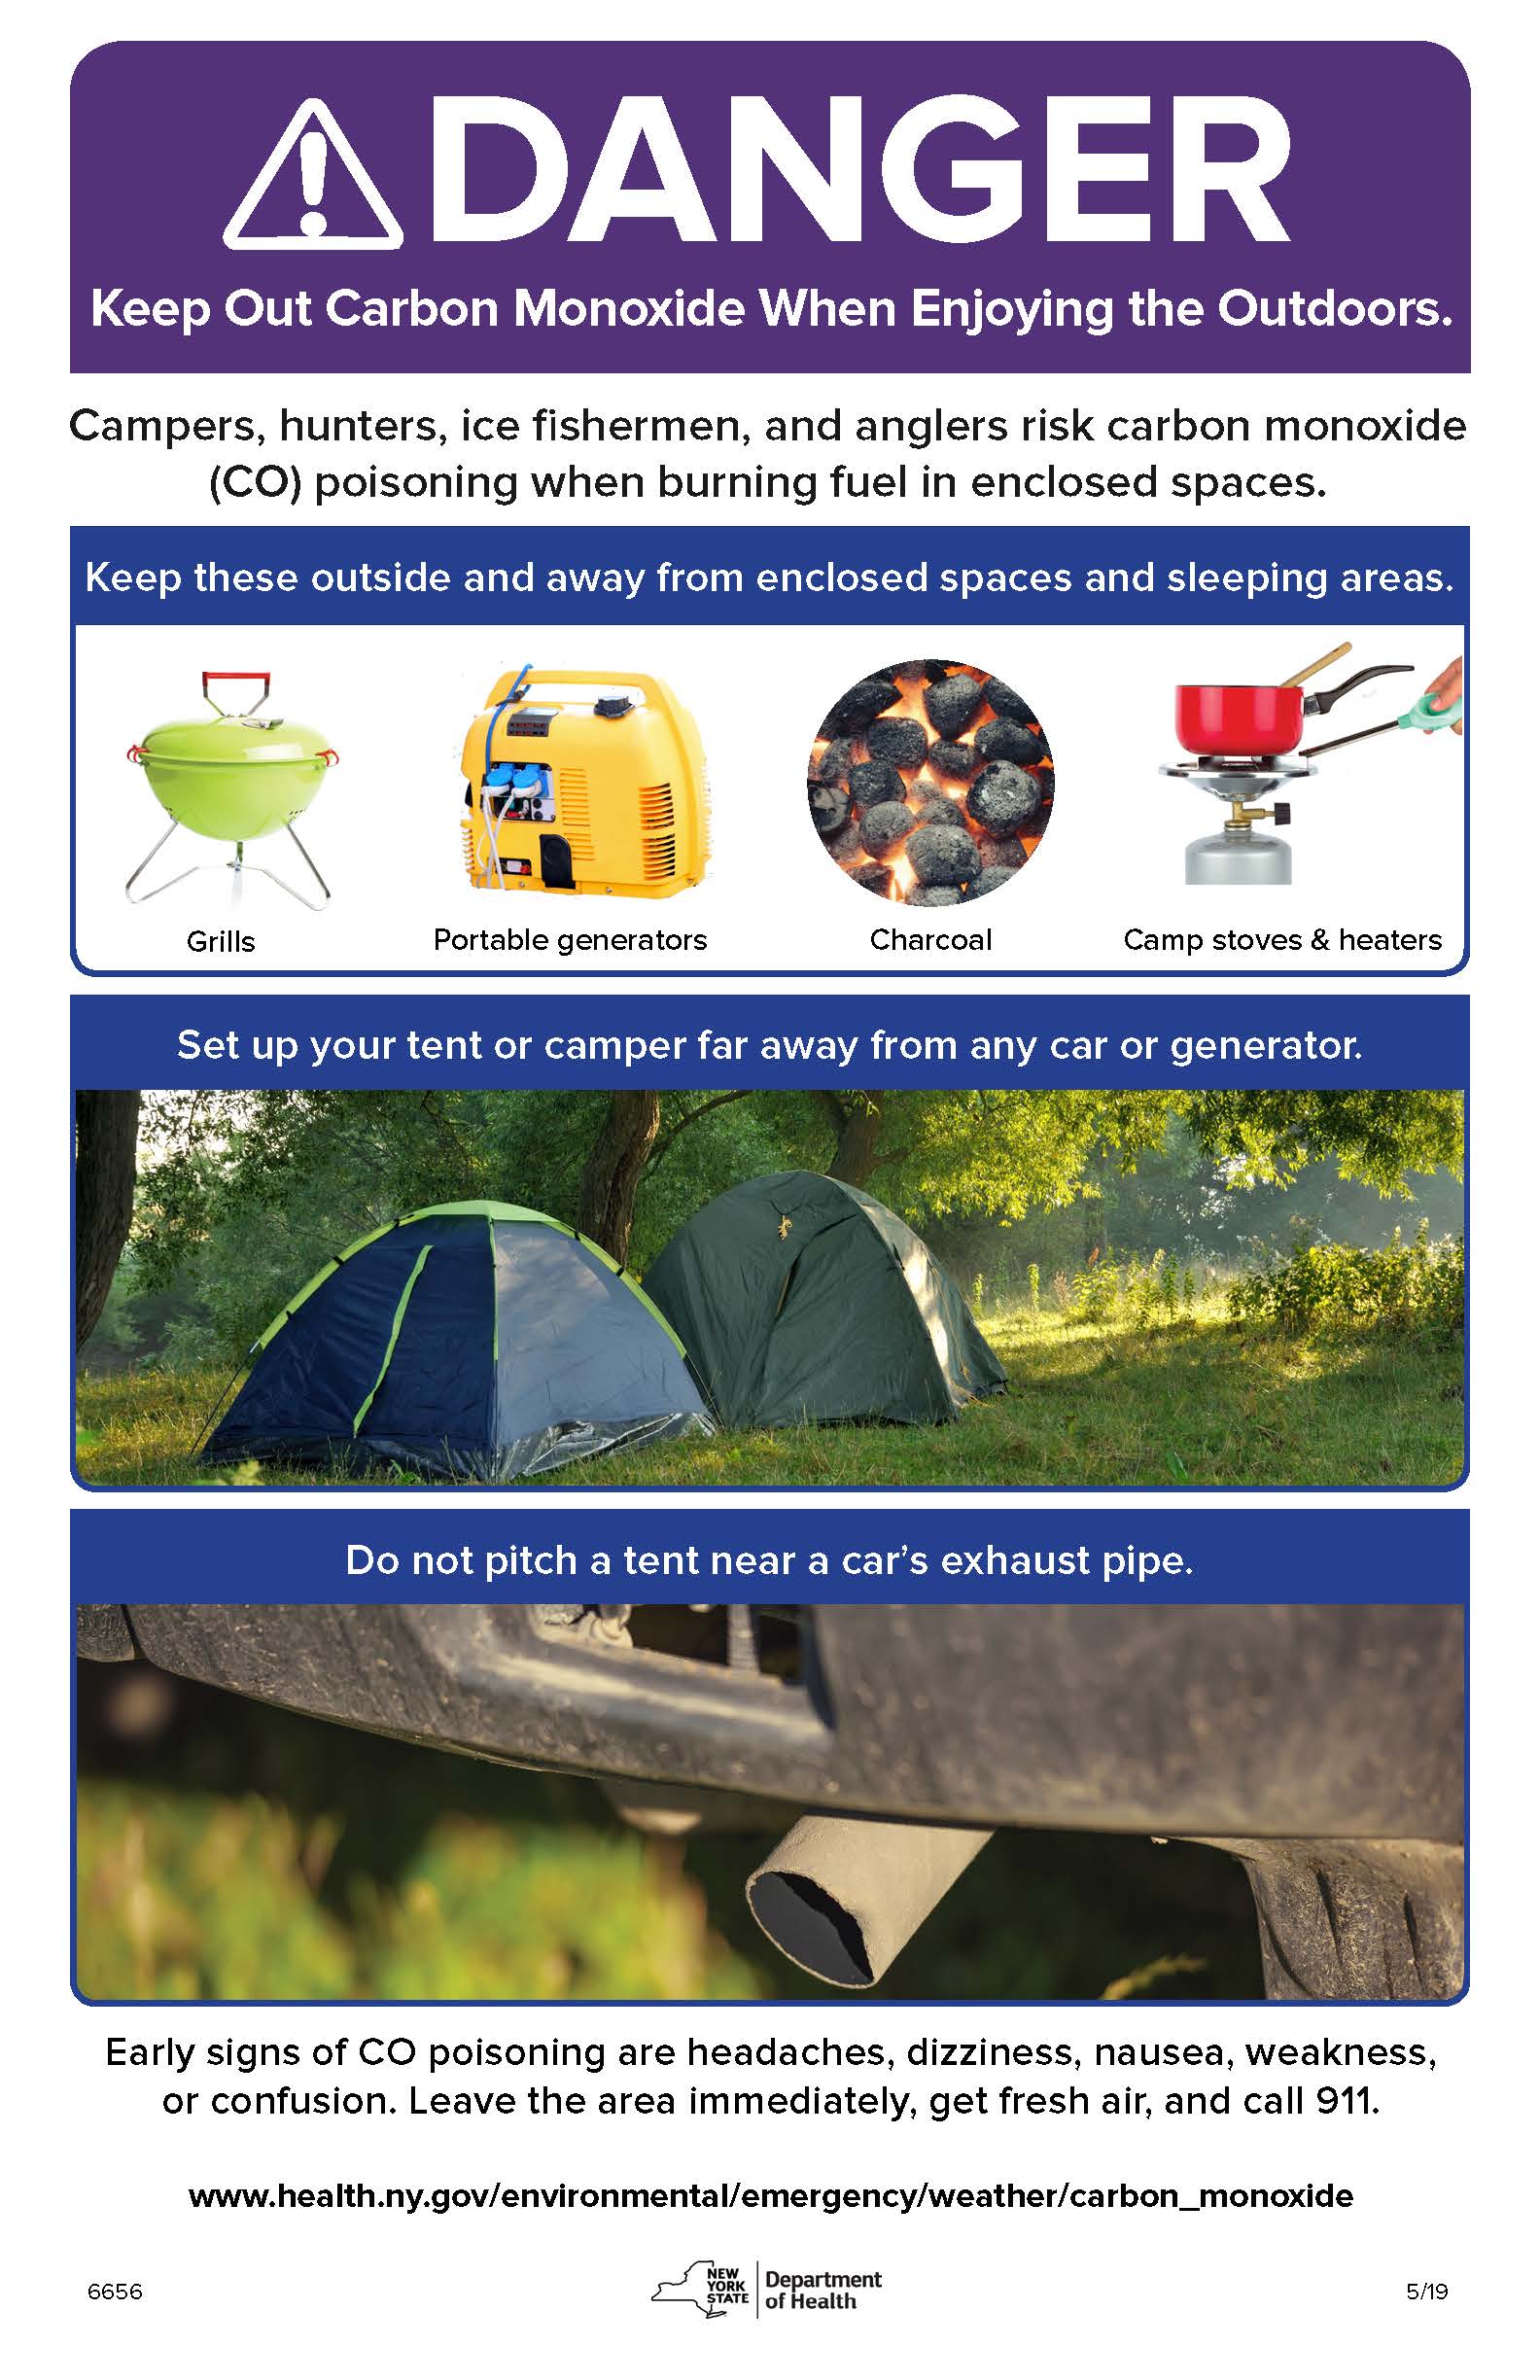 Danger! Keep Out Carbon Monoxide When Enjoying the Outdoors. Campers, hunters, ice fishermen, and anglers risk carbon monoxide (CO) poisoning when burning fuel in enclosed spaces.